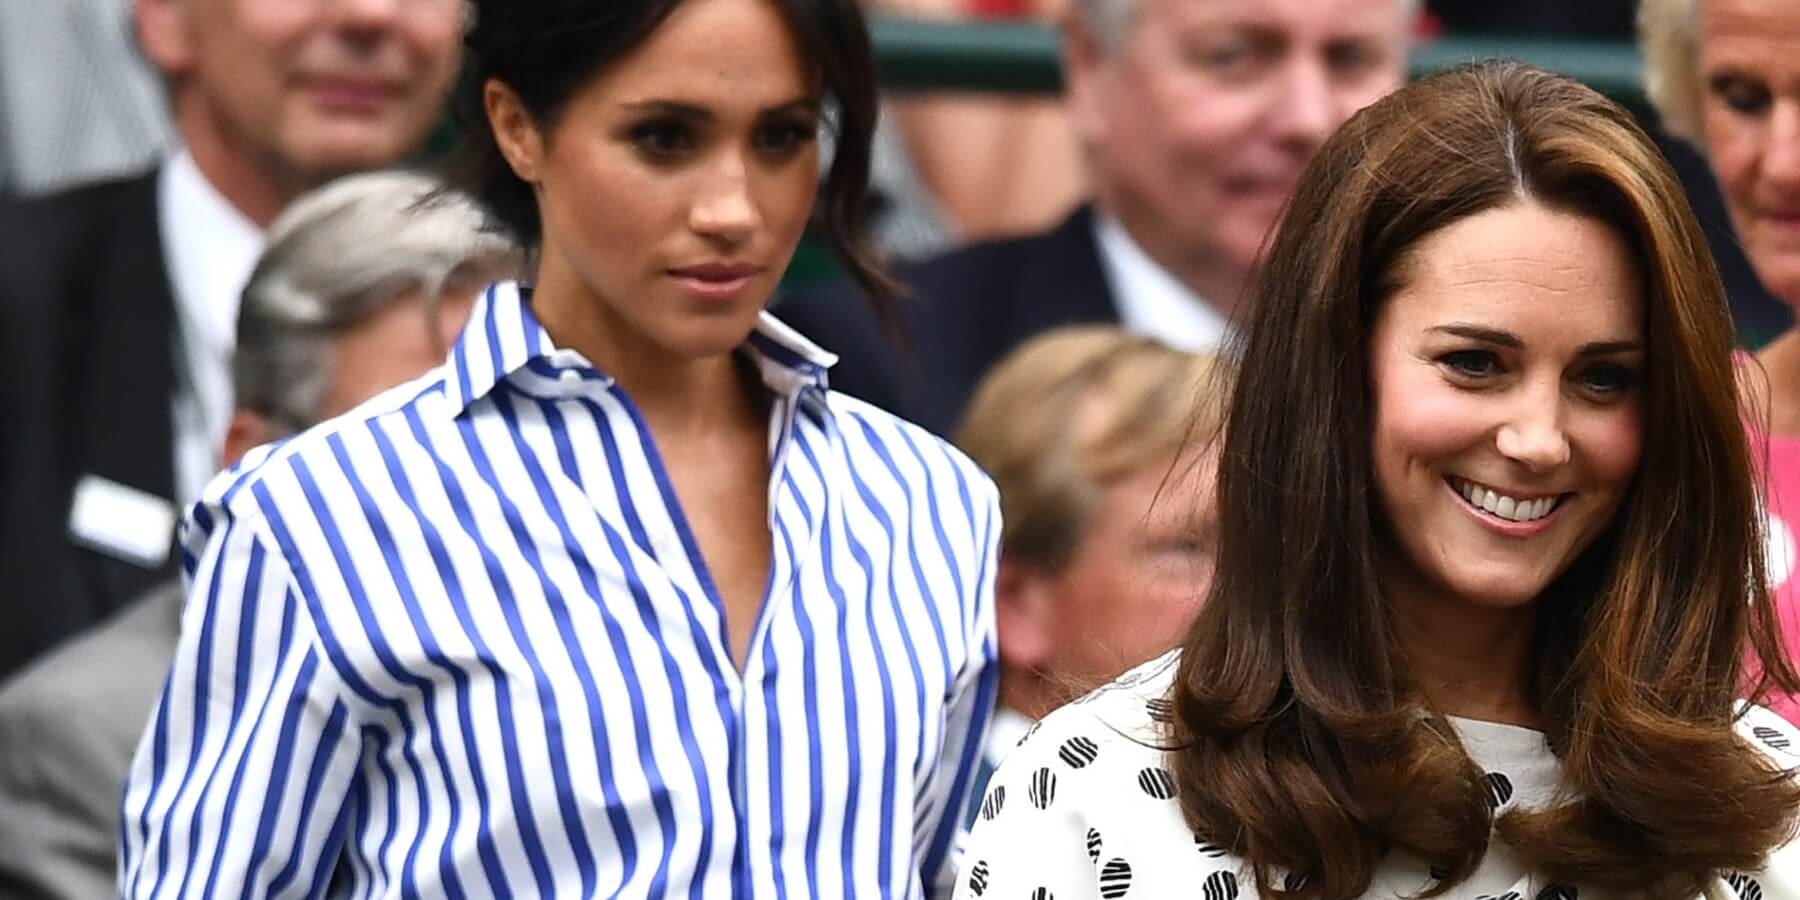 Kate Middleton ‘Protected’ By Palace While Meghan Markle ‘Felt Like She Was Eaten Alive’: Report